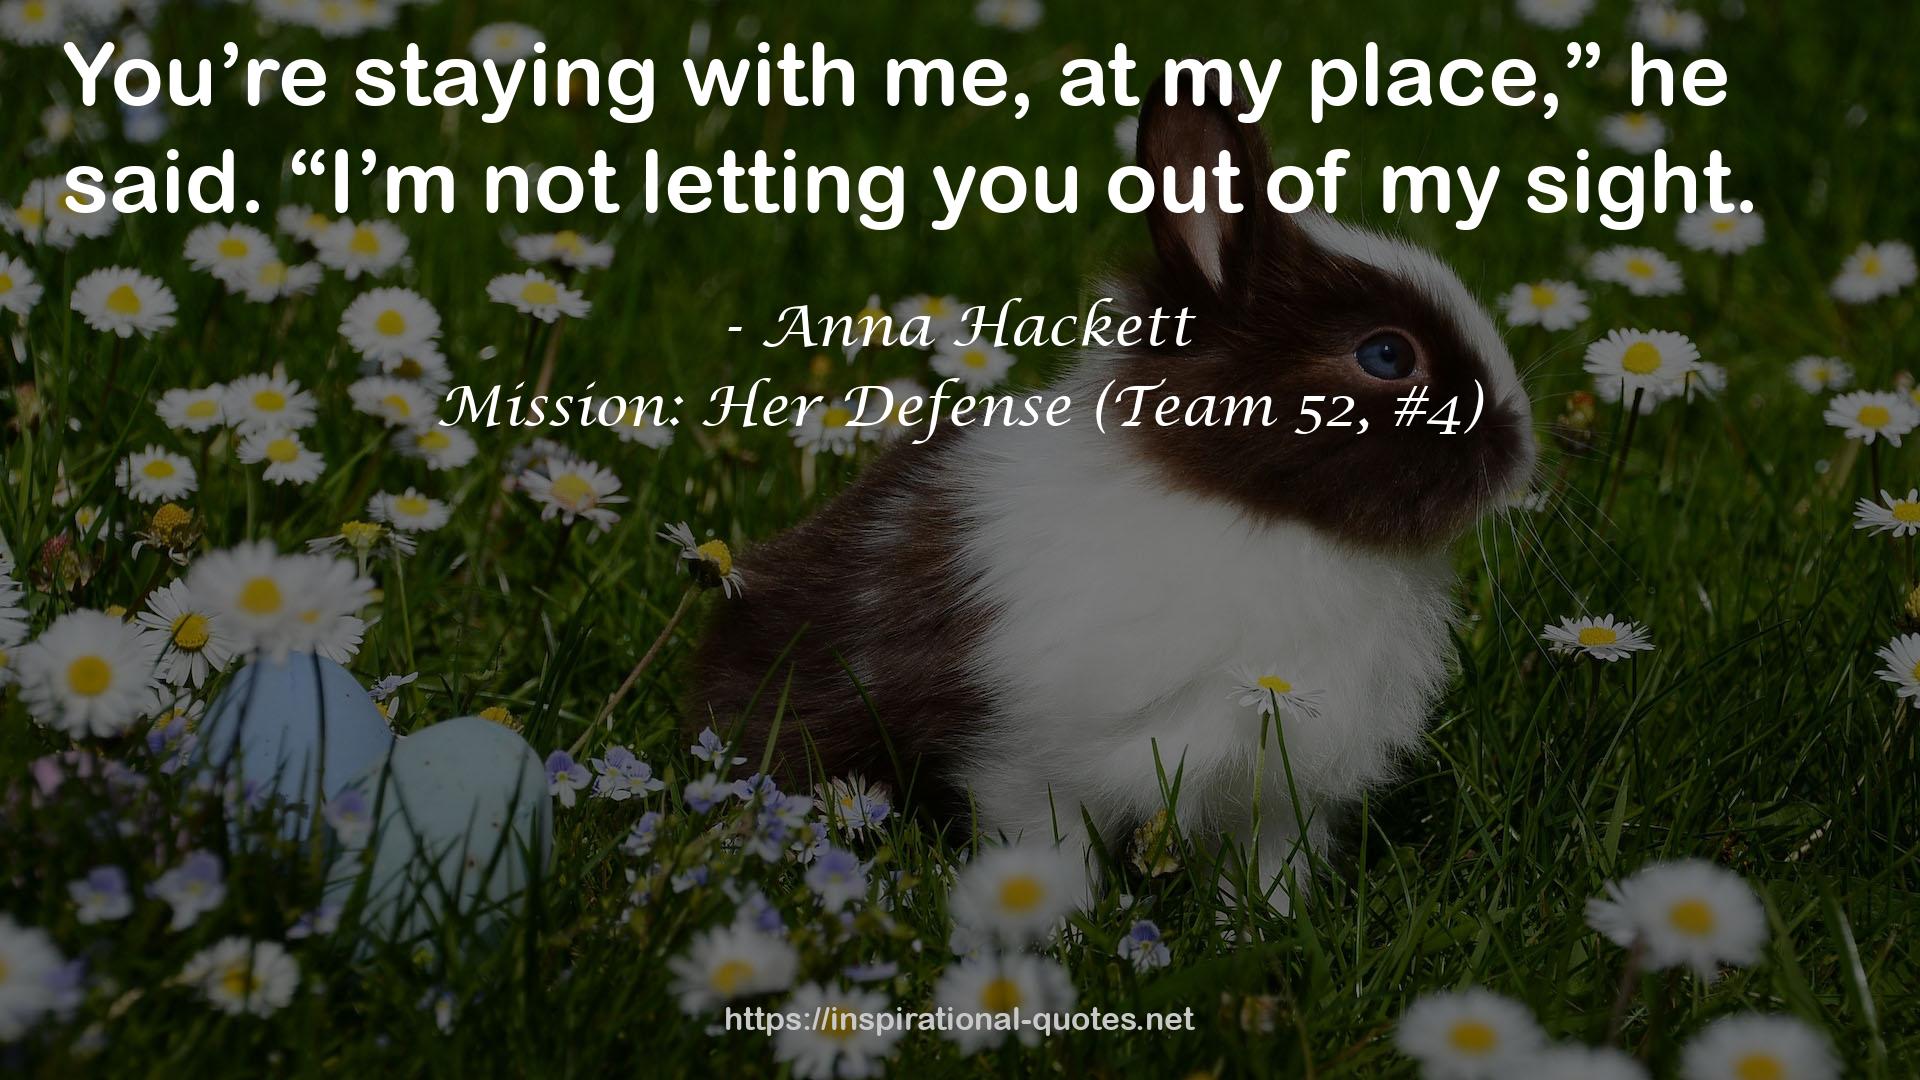 Mission: Her Defense (Team 52, #4) QUOTES